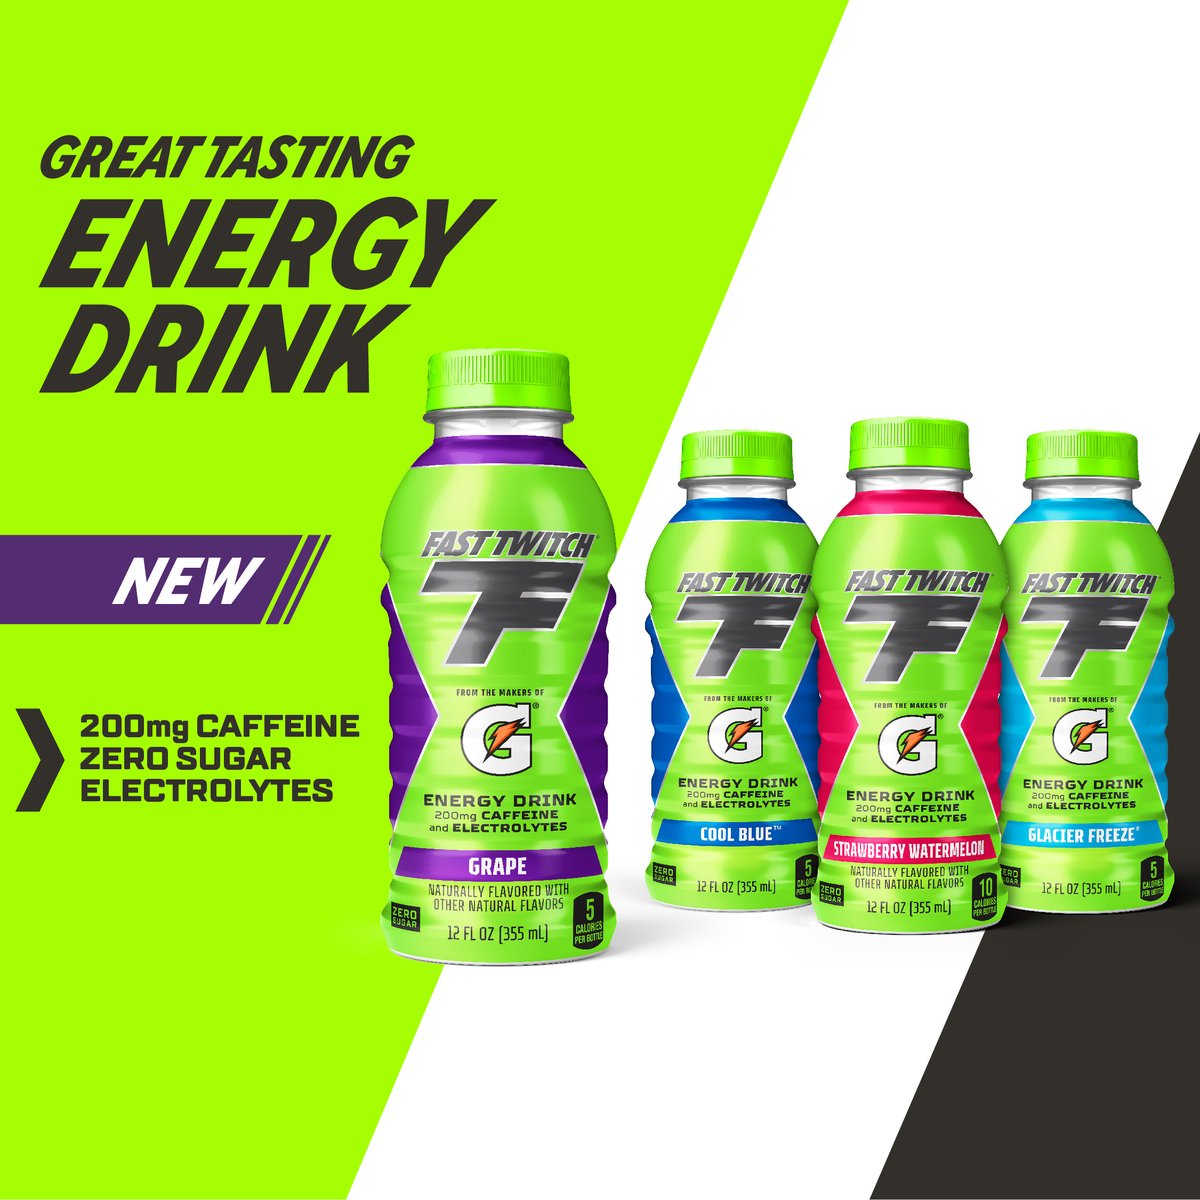 Fast Twitch, an energy drink from Gatorade, now comes in a delicious new grape flavor! Developed with 200mg of caffeine to help athletes focus the mind and power the body for athletic performance.